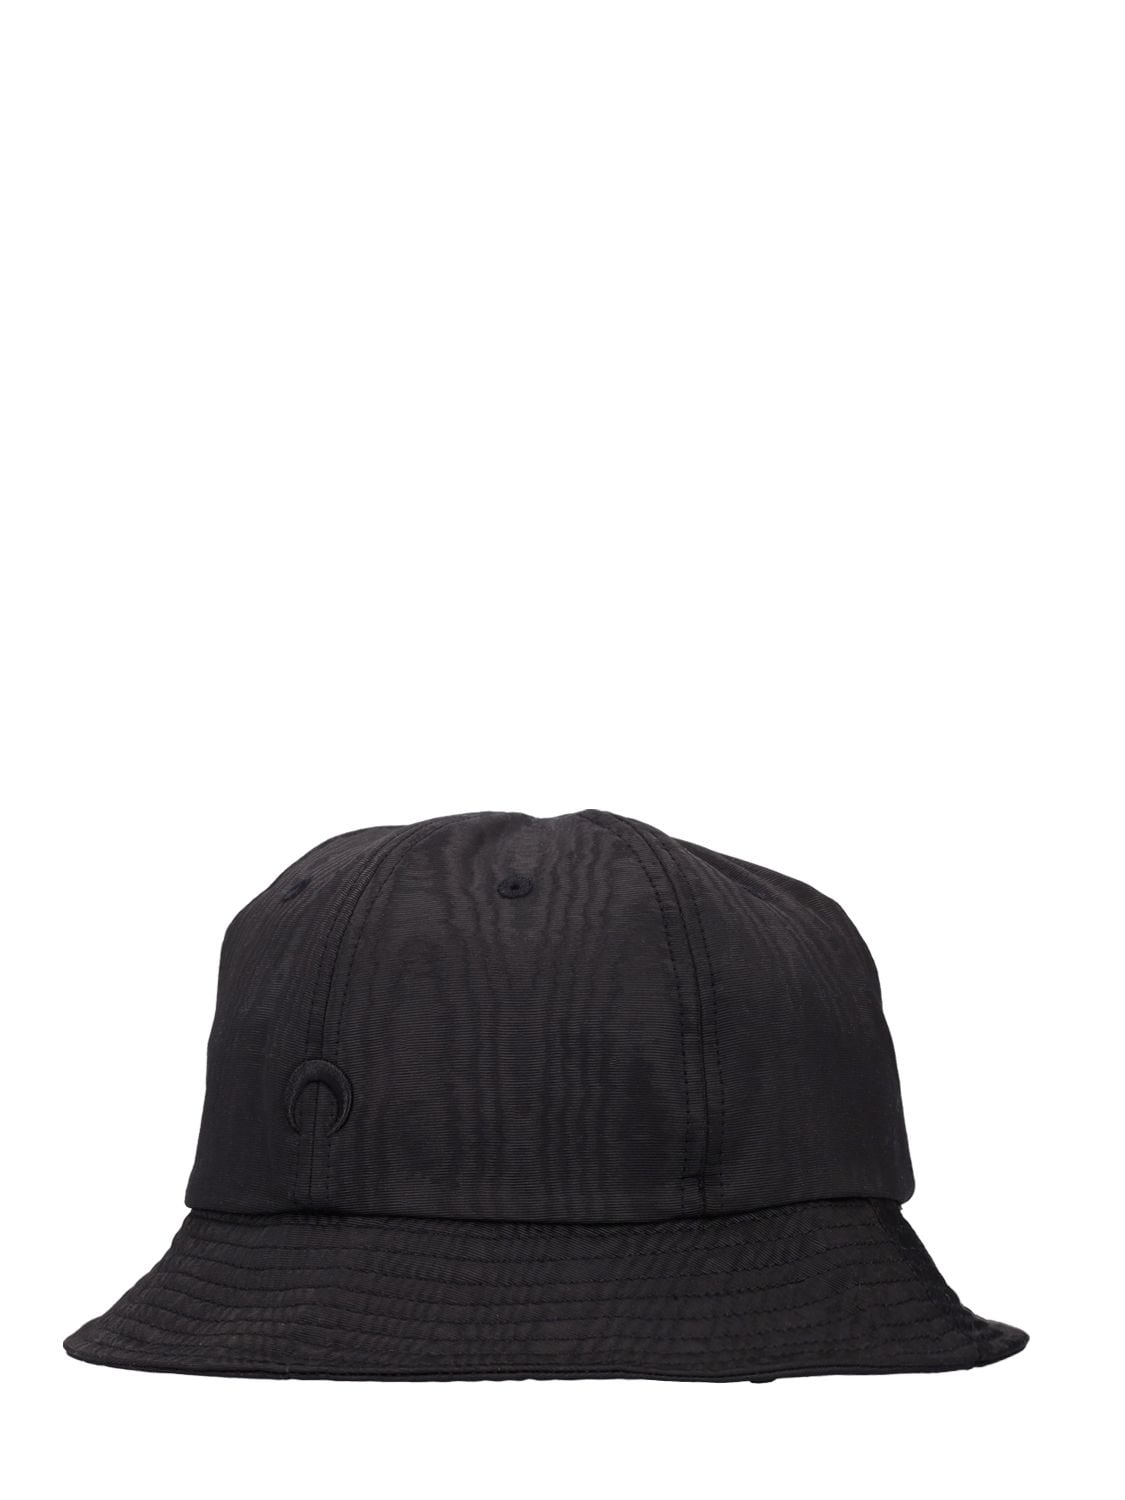 Marine Serre Embroidered Moon Recycled Bucket Hat